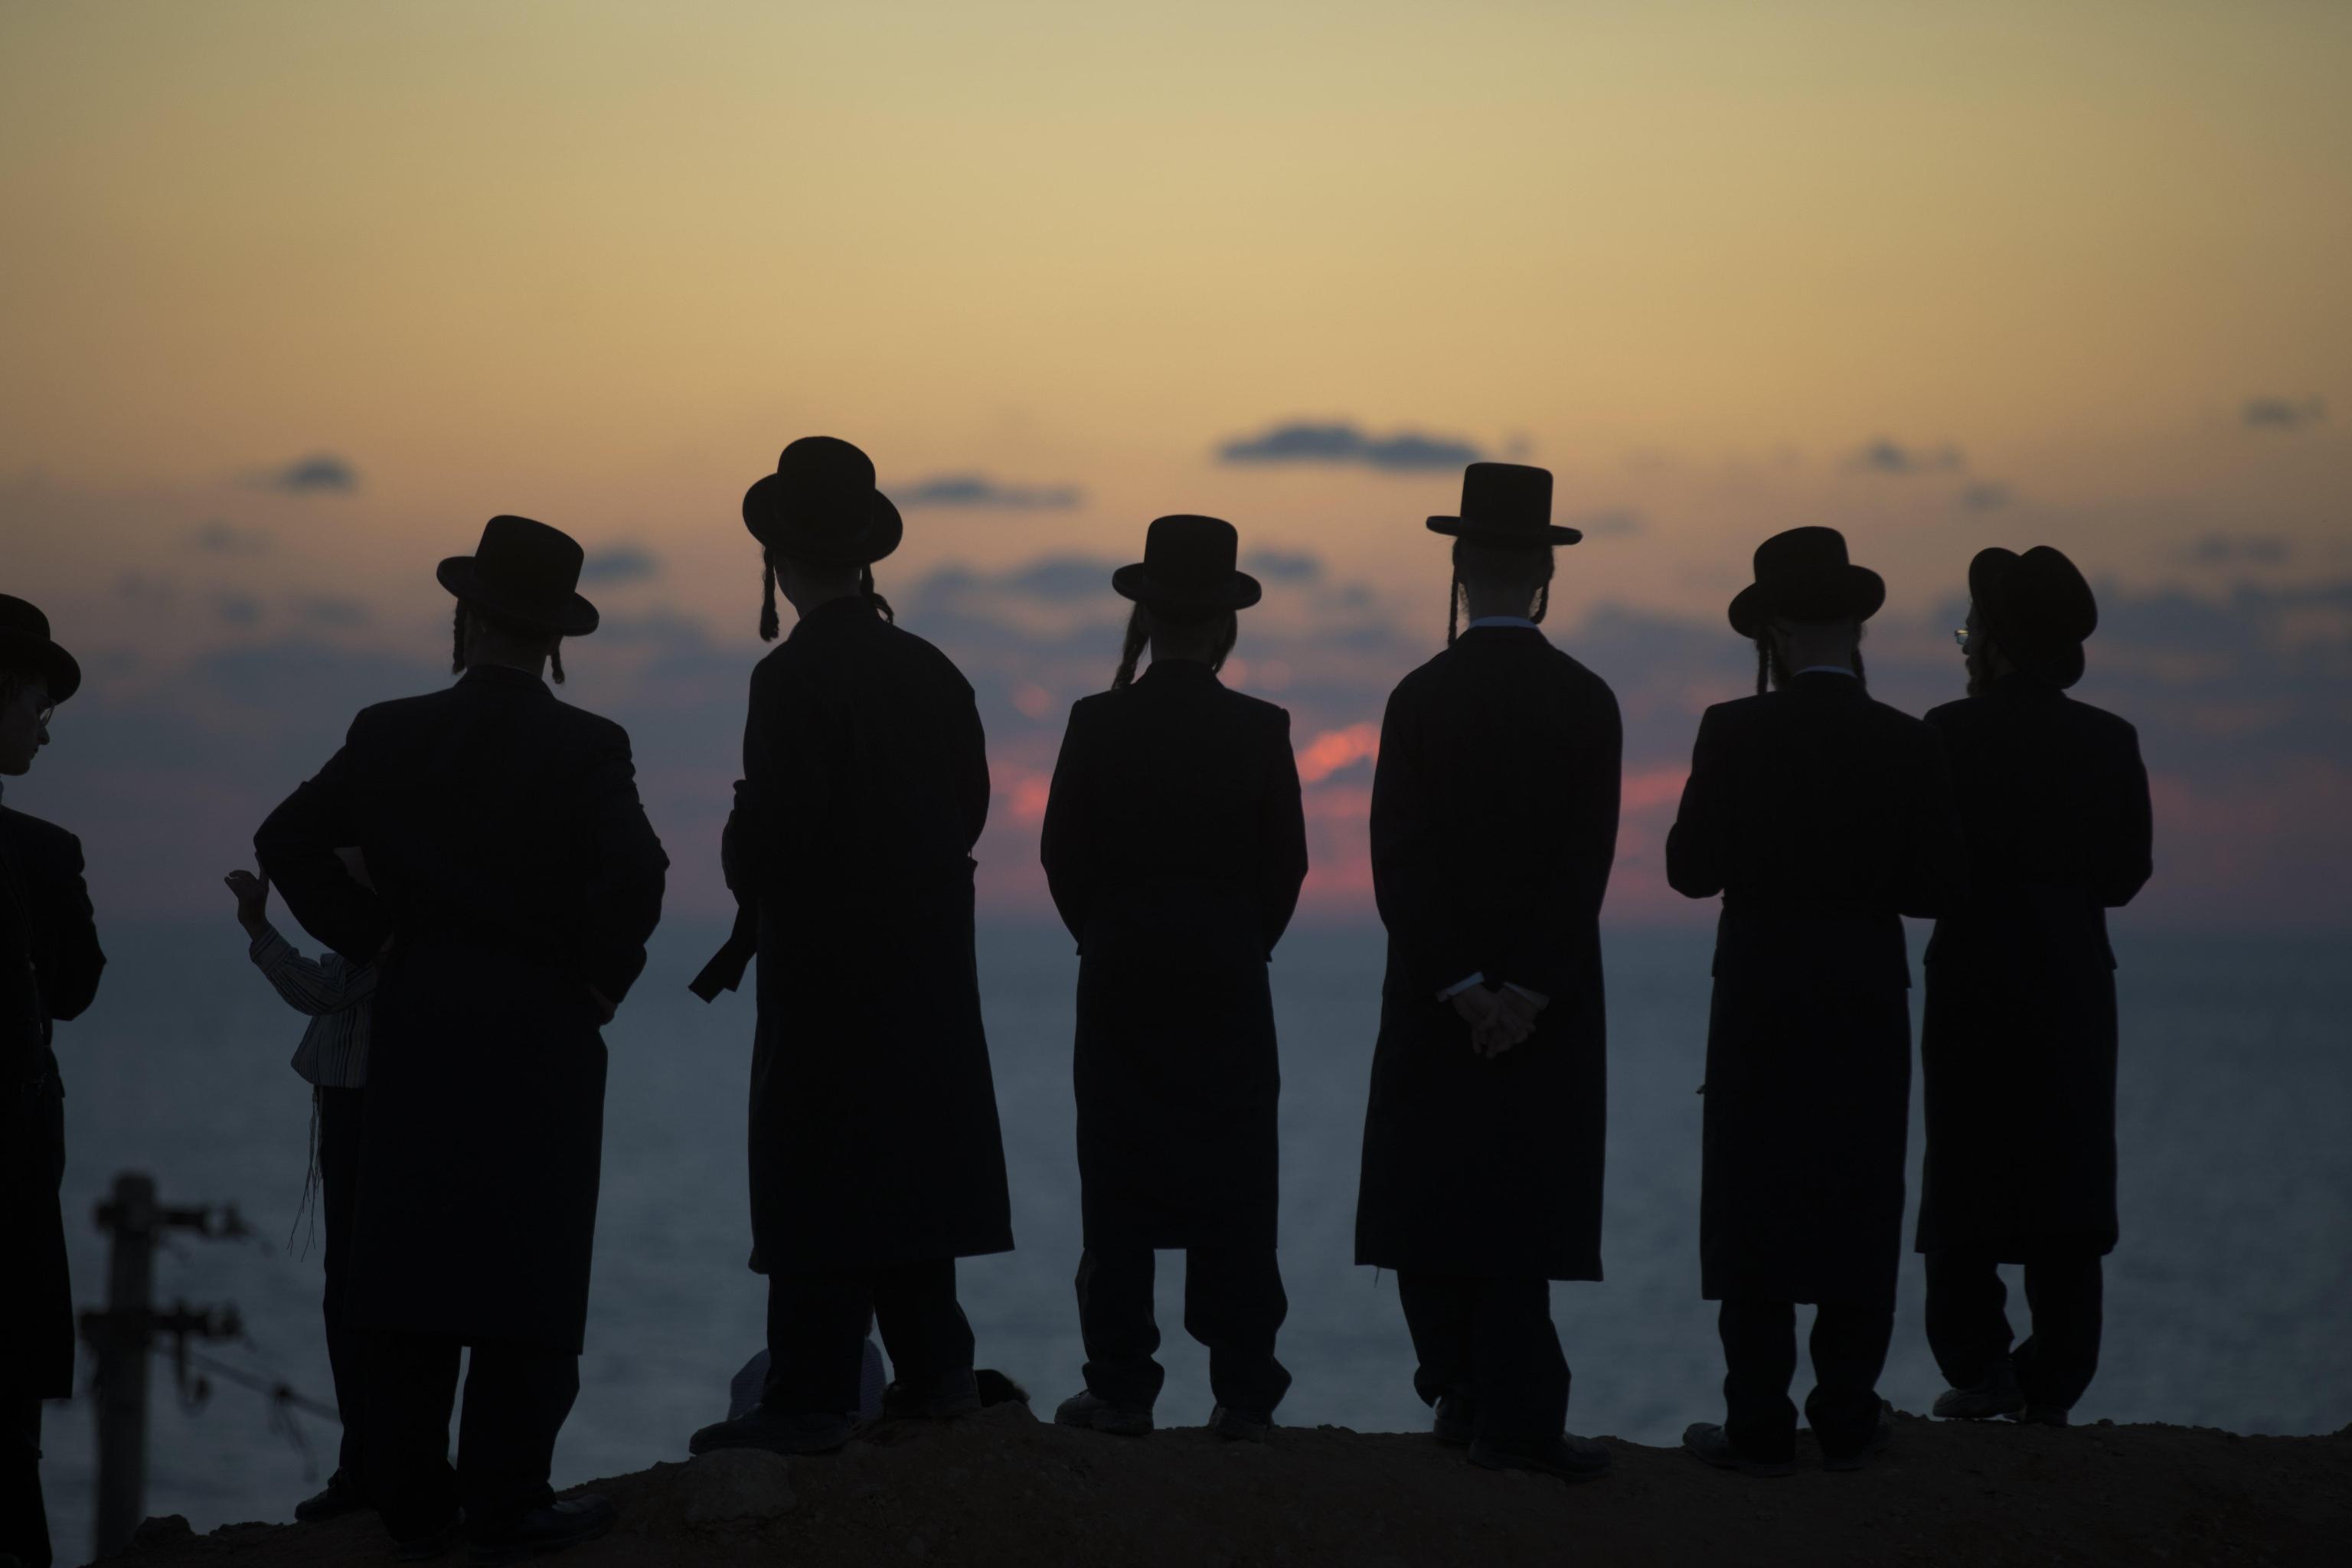 epa06232611 Ultra-Orthodox Jews perform a Jewish prayer named Tashlich a day ahead of Yom Kippur, on a hill overlooking the Mediterranean Sea, next to the Israeli city of Herzeliya, Israel, 28 September 2017. Yom Kippur begins at sunset of 29 September 2017 when the entire country comes to a standstill as people fast and spend much of the day in prayer till the evening of 30 September 2017.  EPA/ATEF SAFADI